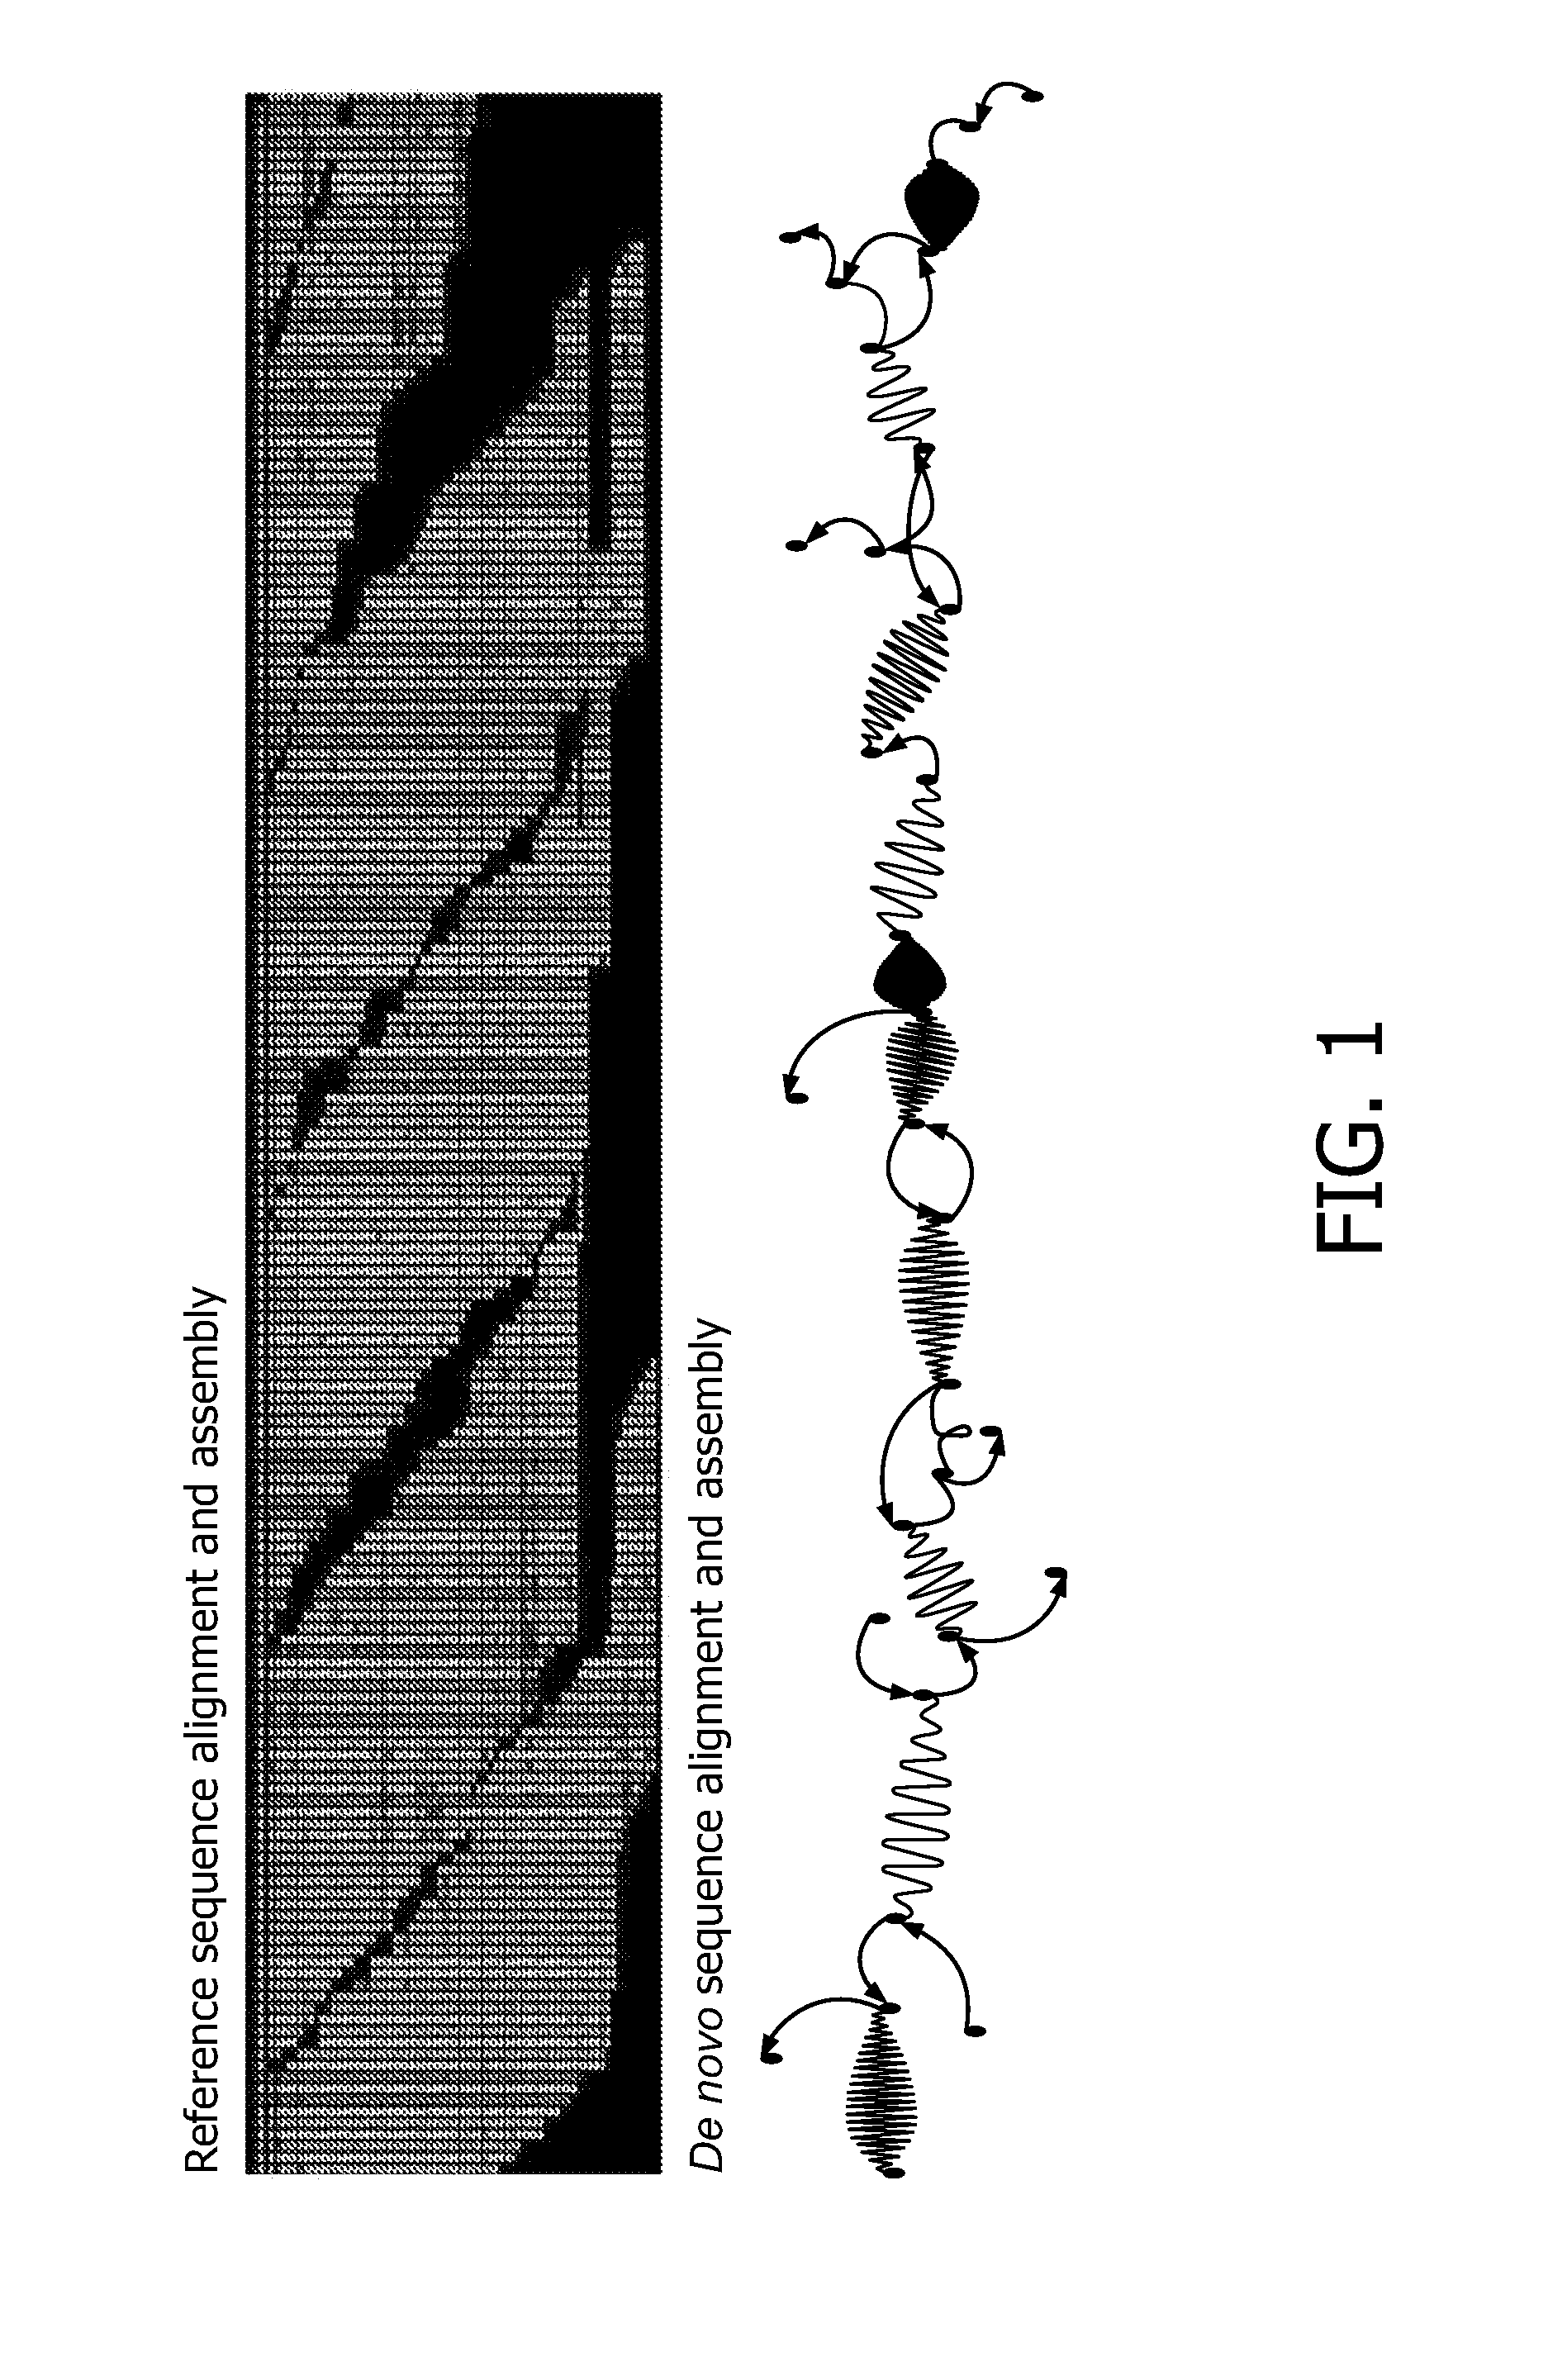 Method for Assembly of Nucleic Acid Sequence Data